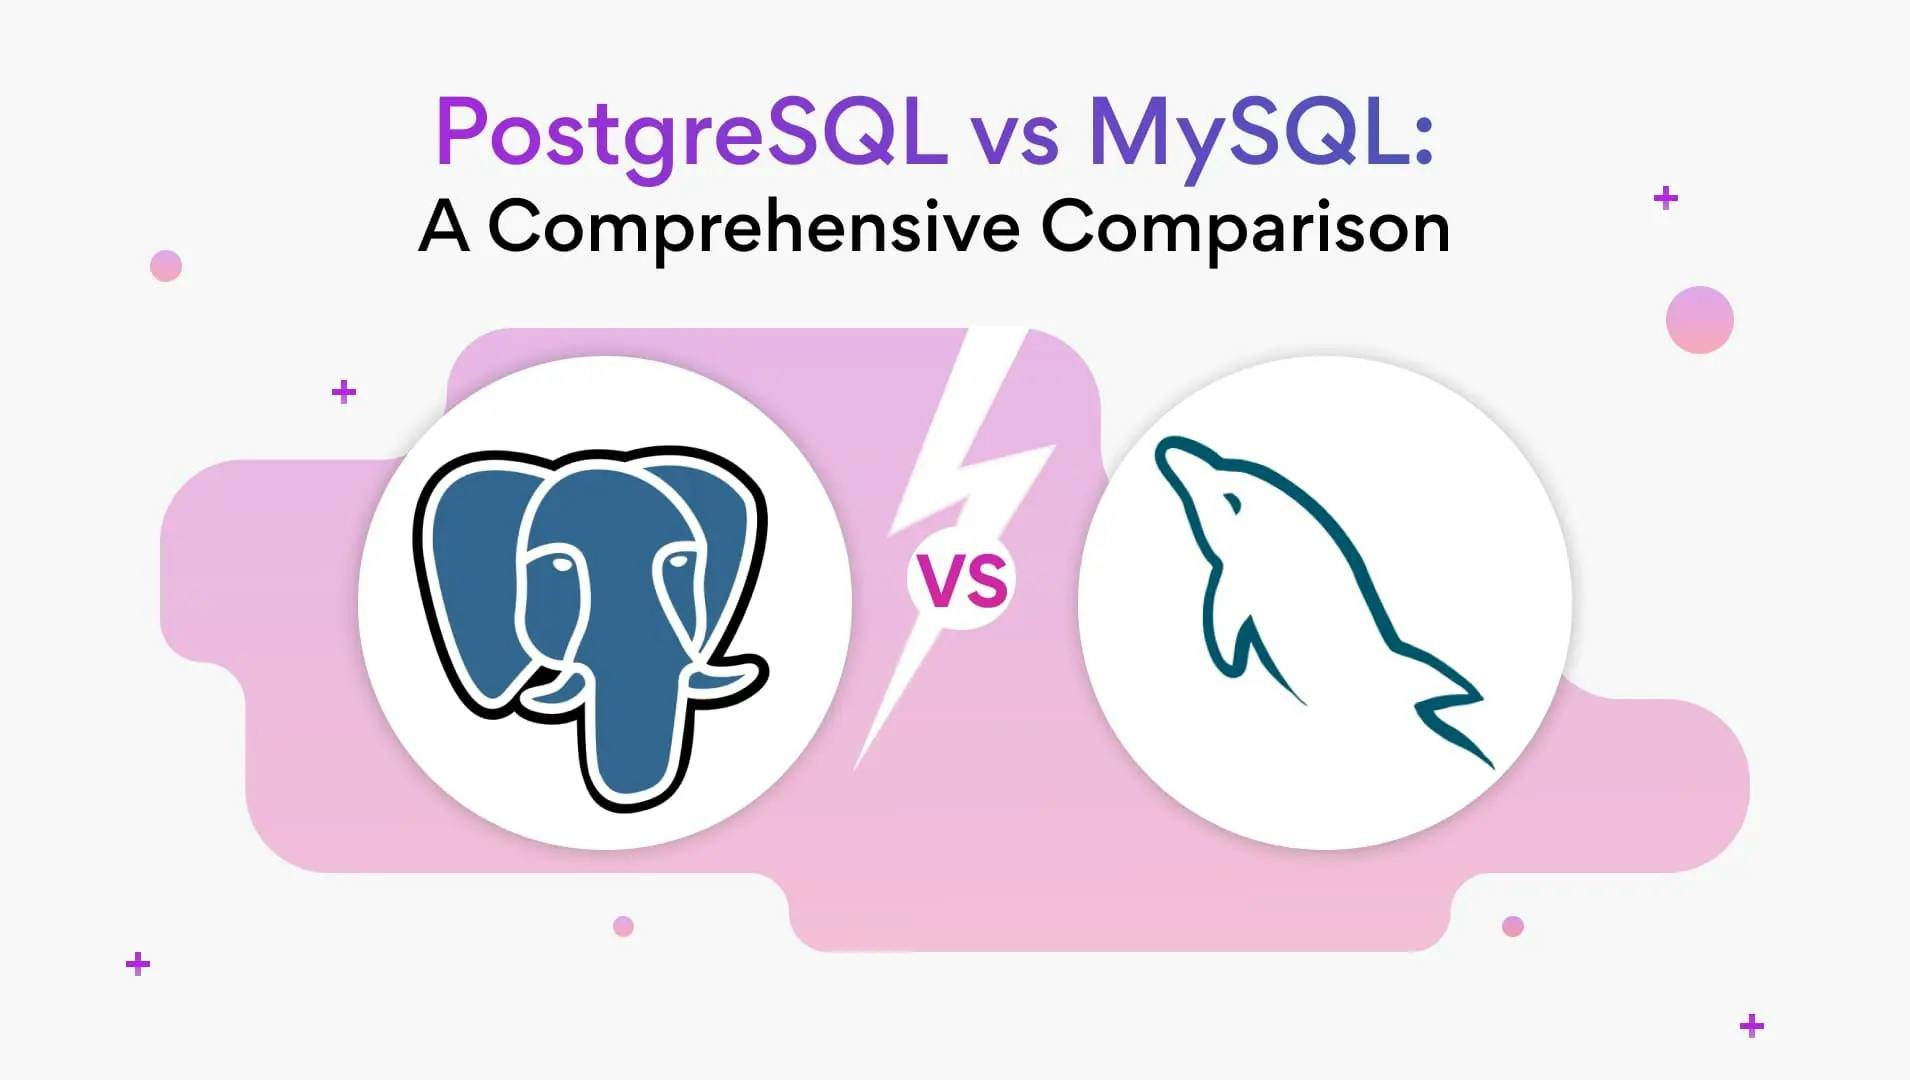 PostgreSQL vs MySQL: Which Is the Right Open Source Database for Your Business